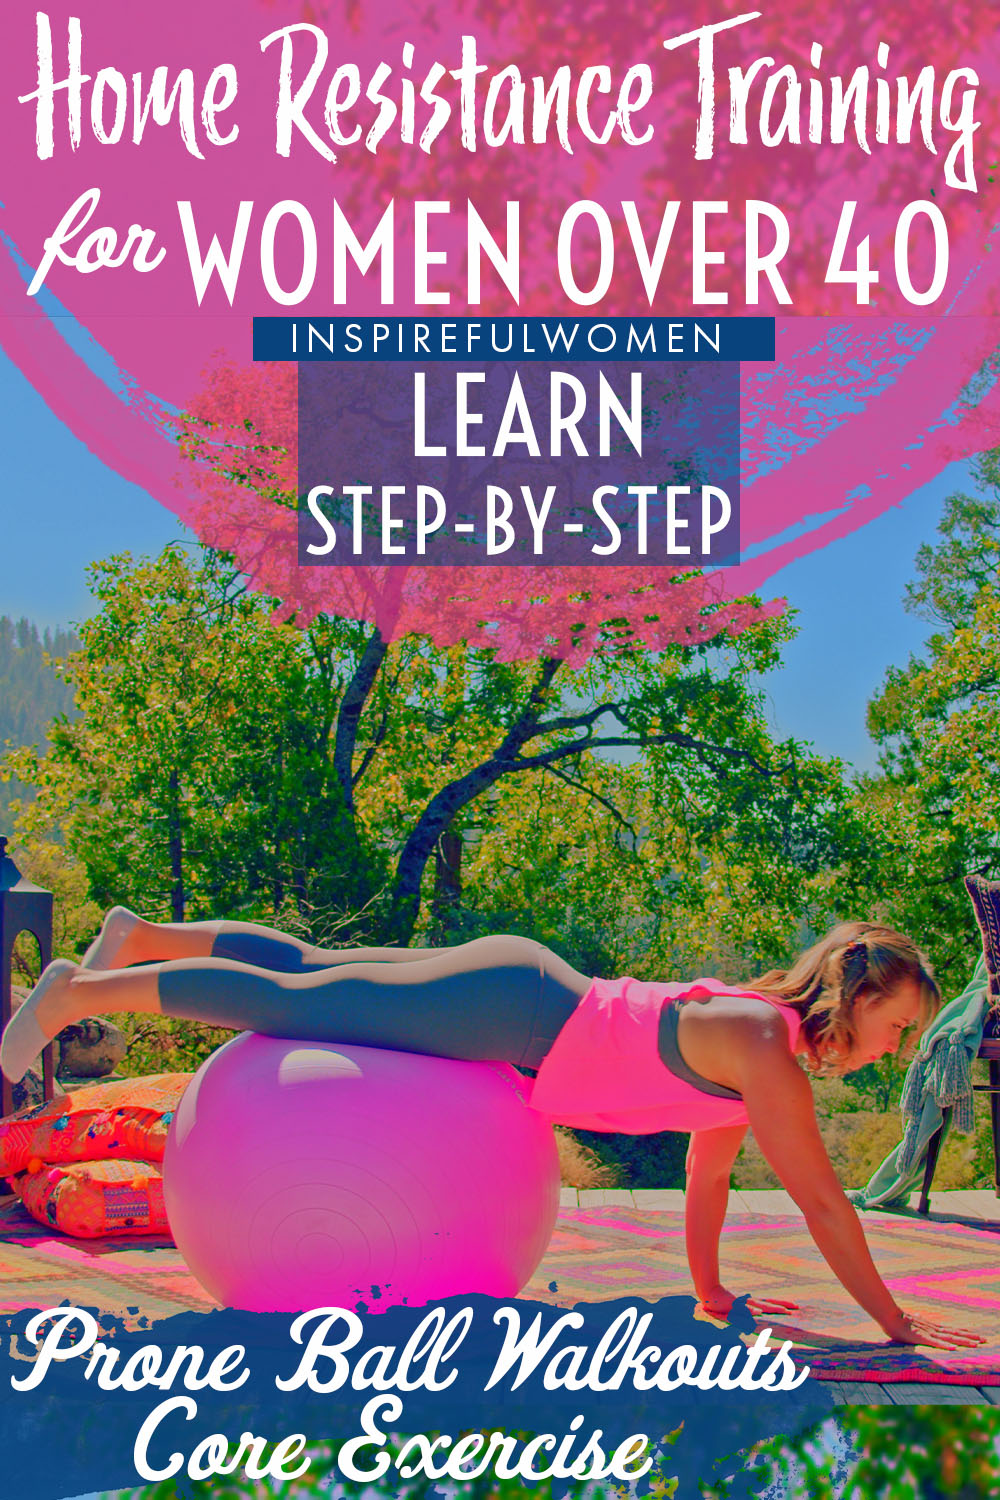 gym-ball-walkouts-prone-home-stomach-ab-core-resistance-exercise-women-over-40